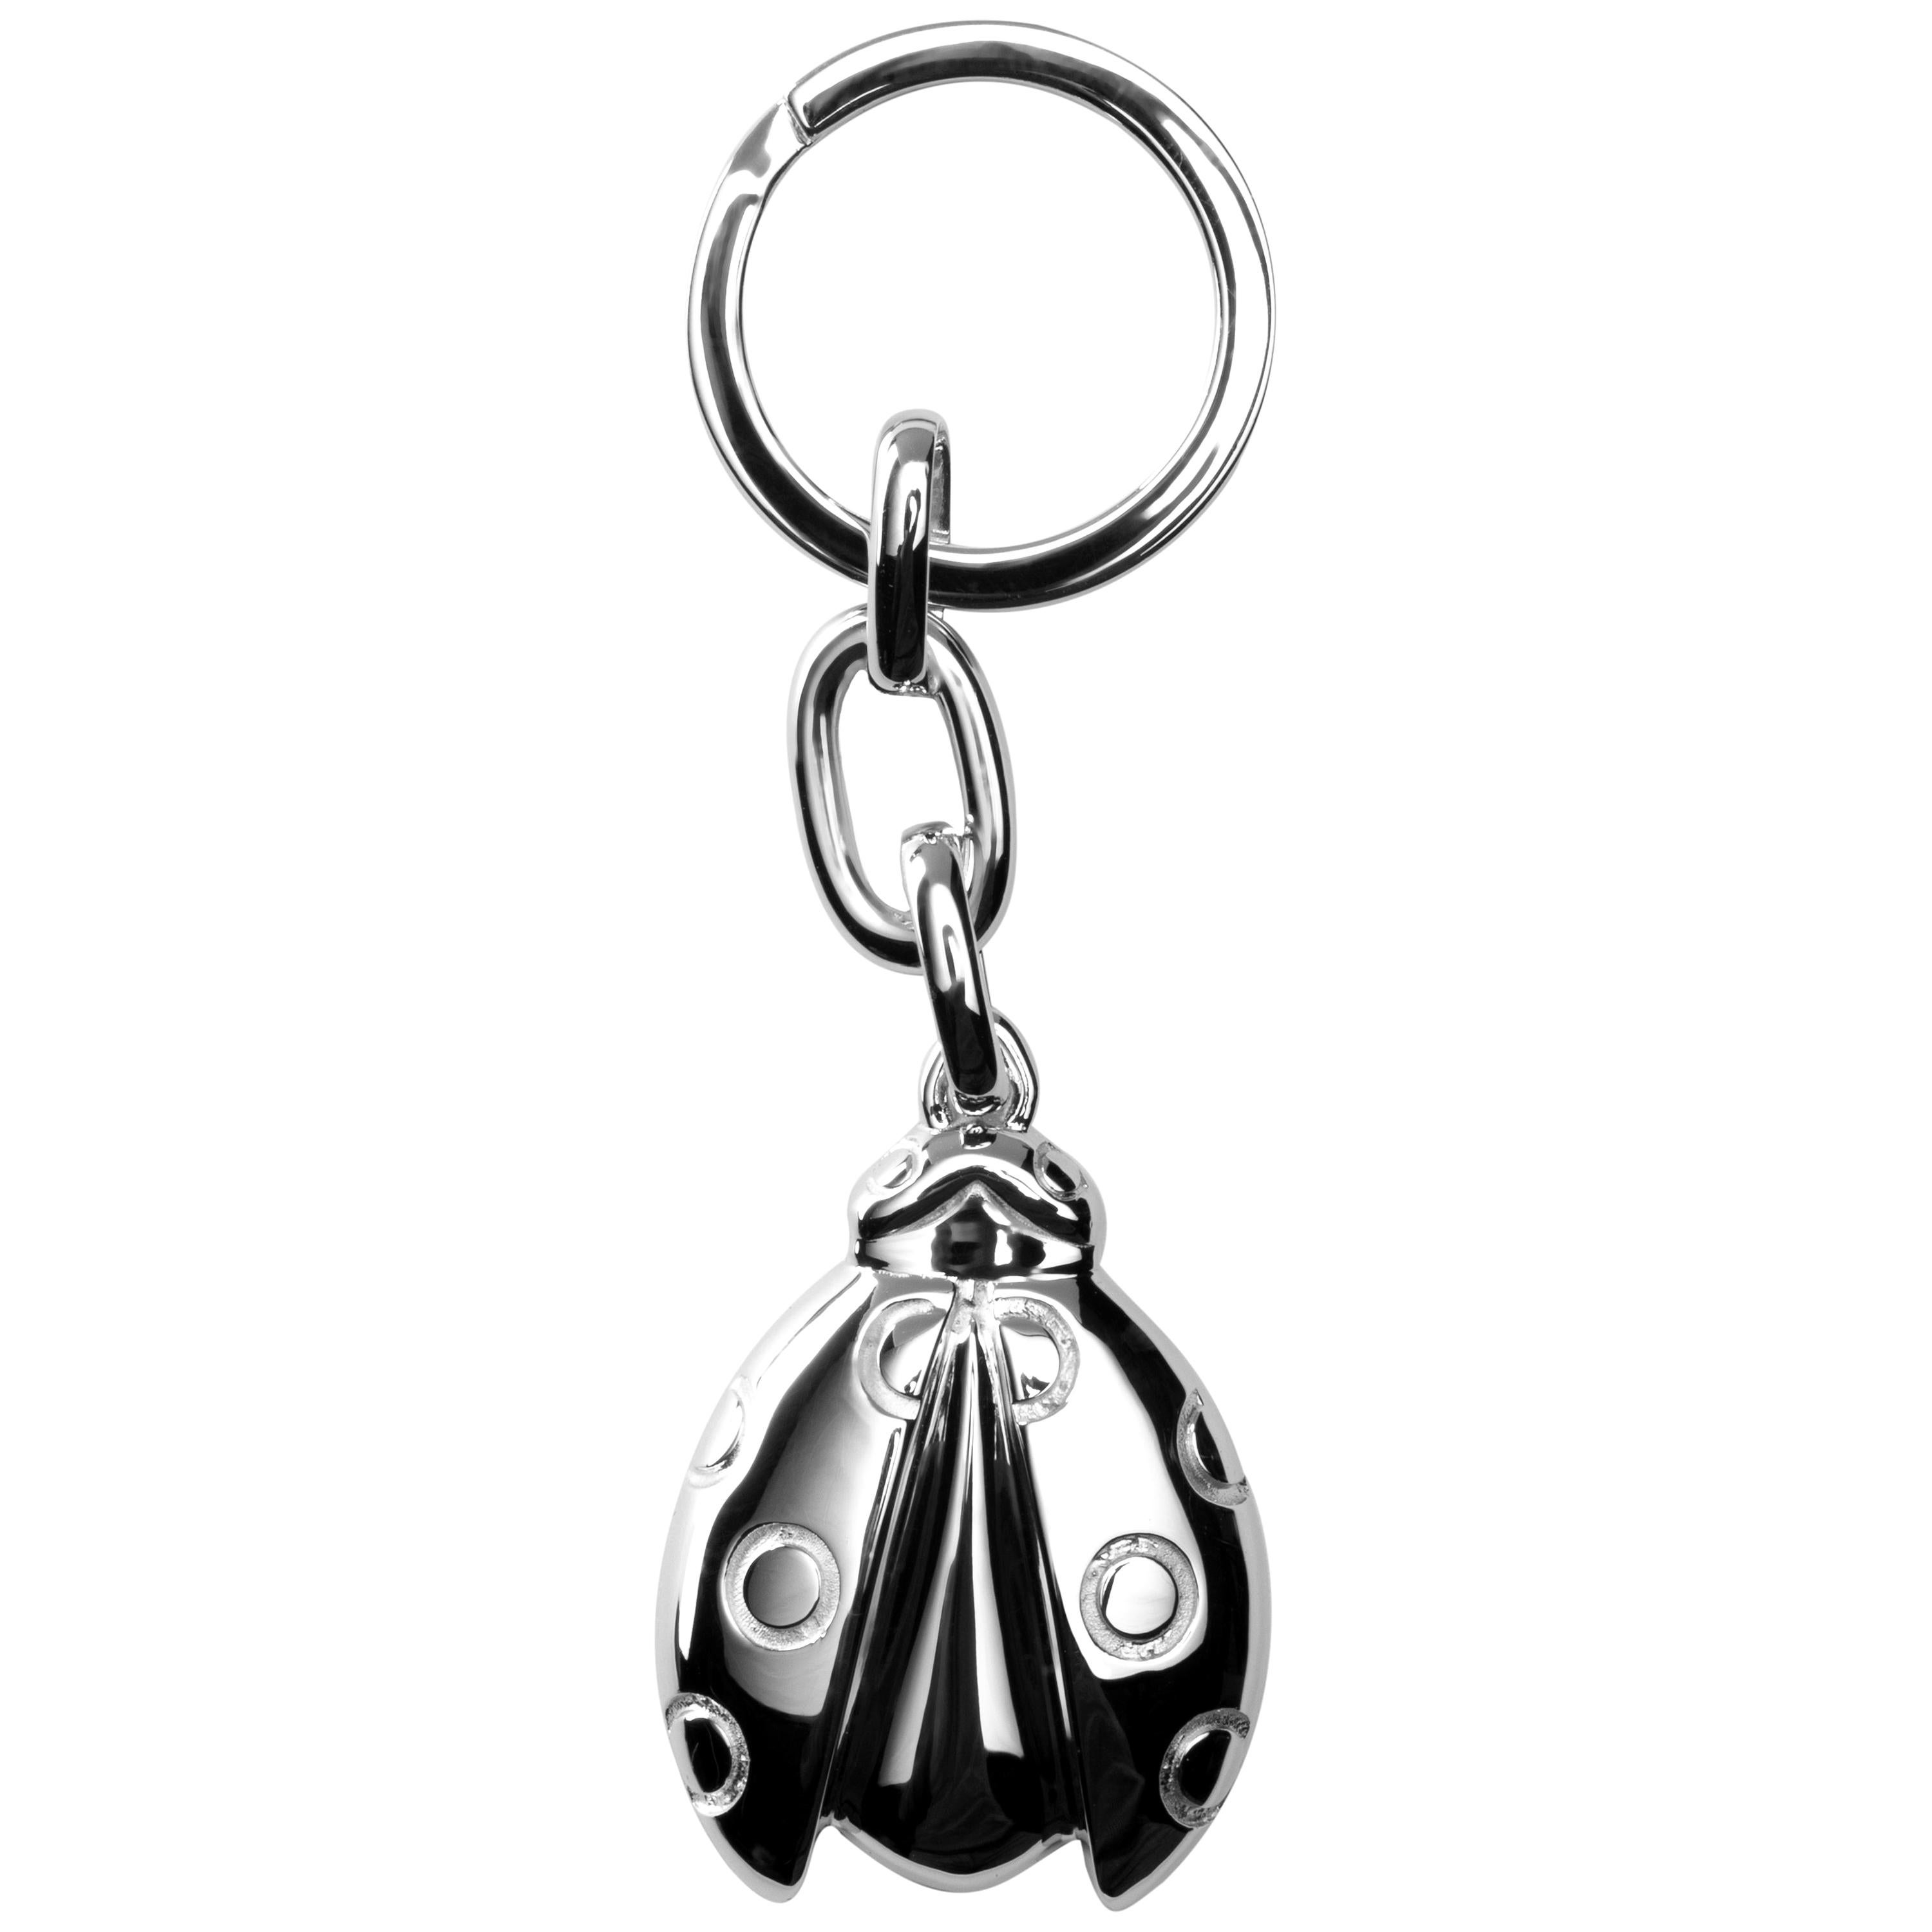 Alex Jona design collection, hand crafted in Italy, rhodium plated Sterling Silver Ladybug key holder.
Dimensions : L 3.71 in/ 94.36 mm x W 0.98 in/ 24.91 mm x Depth: 0.08 in/ 2.26 mm

Alex Jona gifts stand out, not only for their special design and